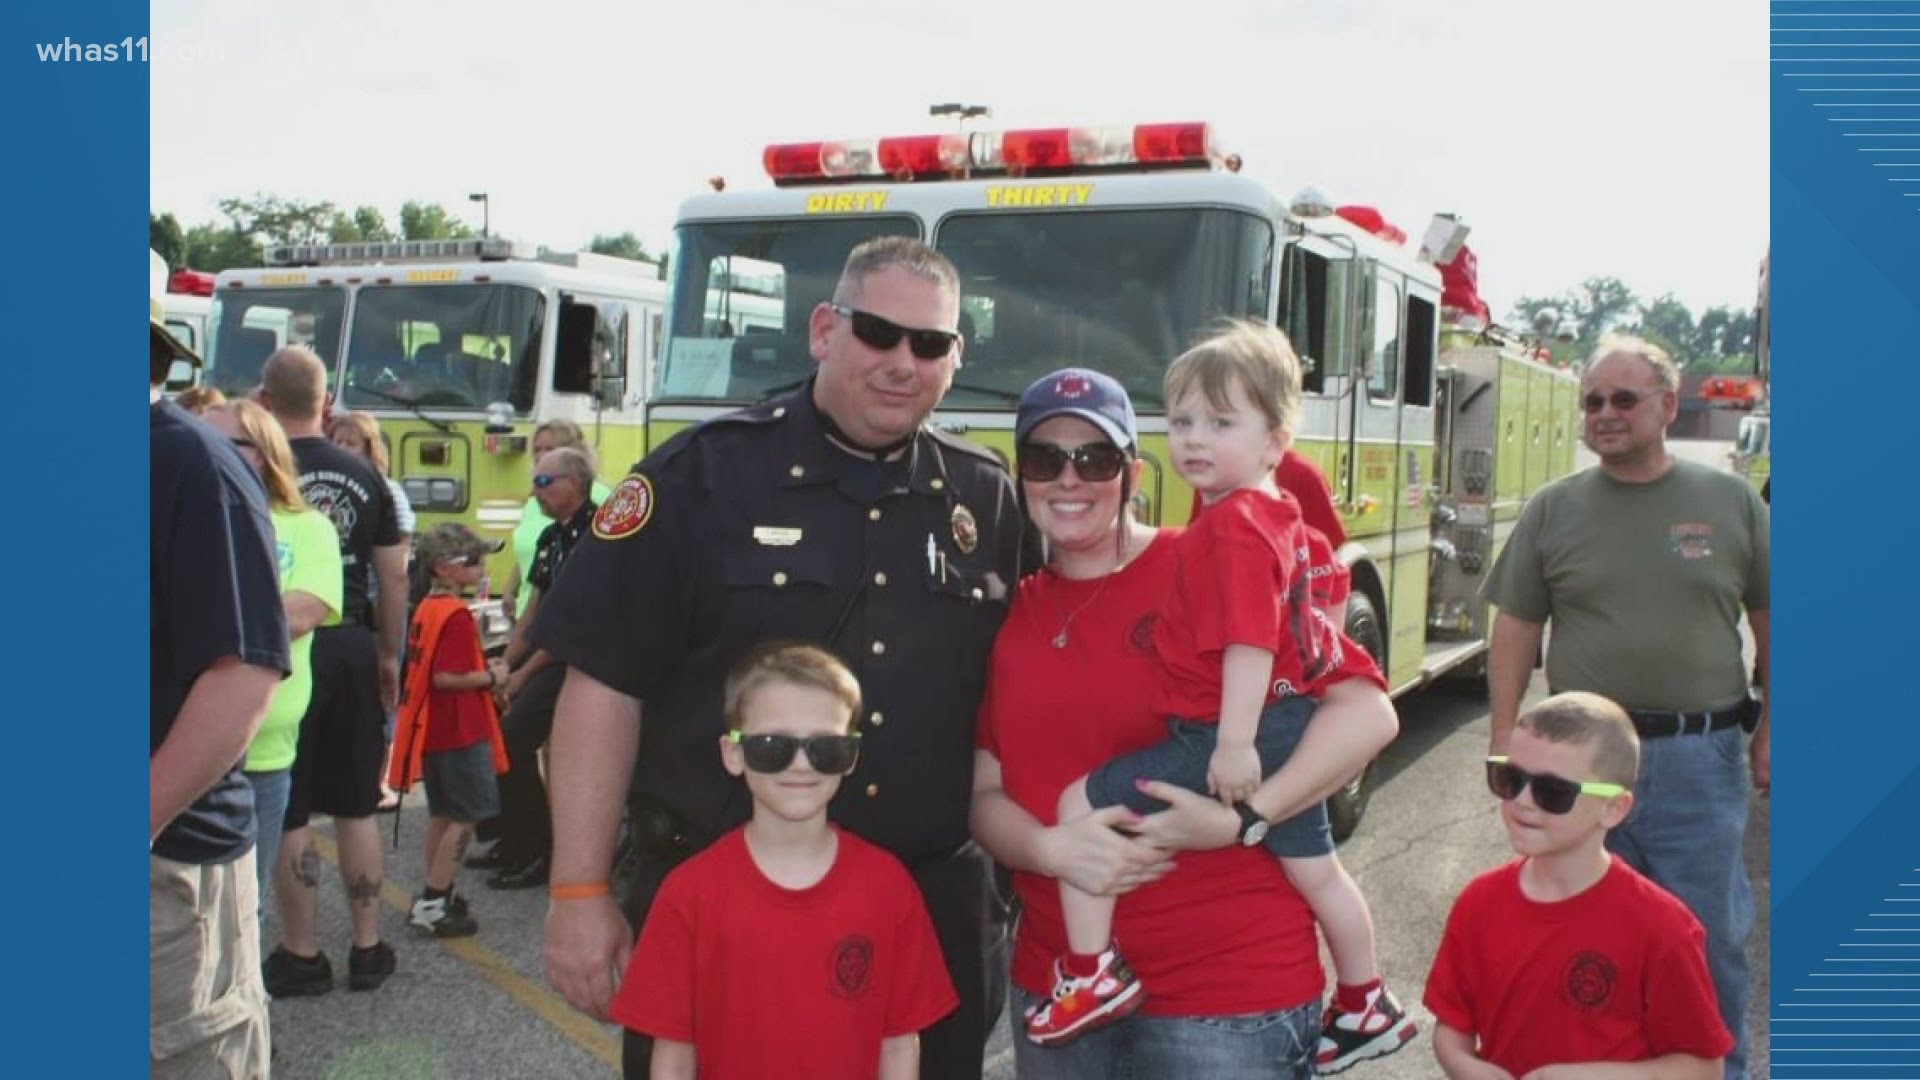 Deputy Chief Brian Morgan served the community for 28 years. His loved ones say he was a great father, friend and coworker.